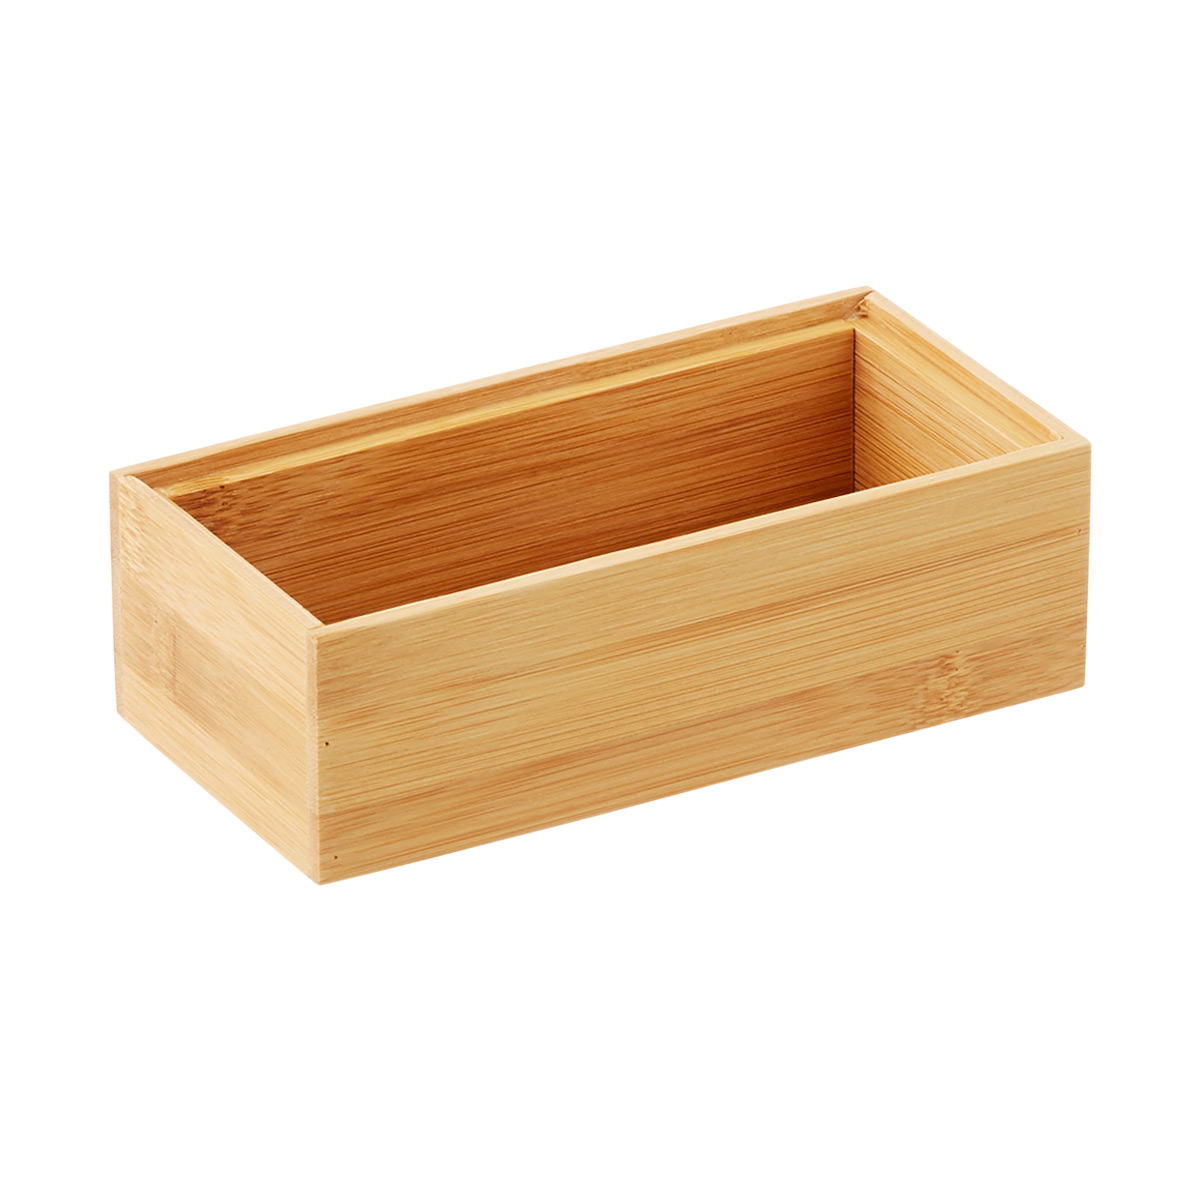 https://www.containerstore.com/catalogimages/382274/10046924-stackable-bamboo-drawer-org.jpg